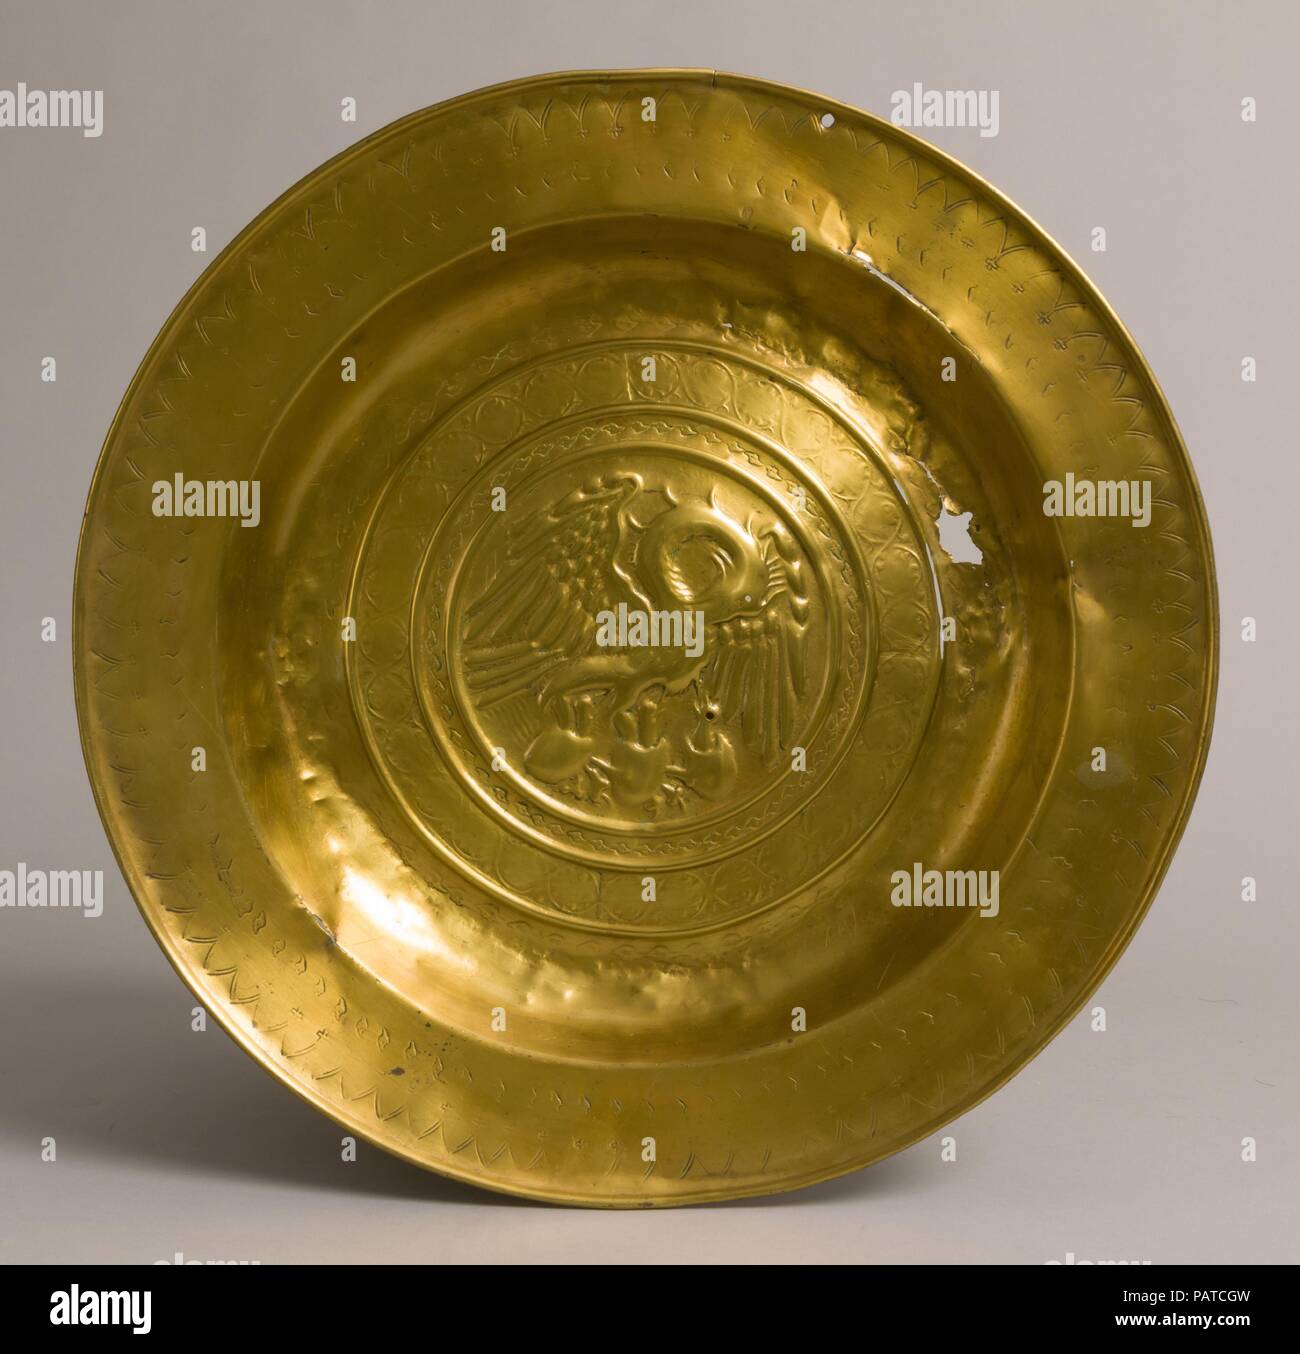 Dish. Culture: German. Dimensions: Overall: 15 7/8 x 1 7/16 in. (40.3 x 3.7 cm). Date: early 16th century. Museum: Metropolitan Museum of Art, New York, USA. Stock Photo